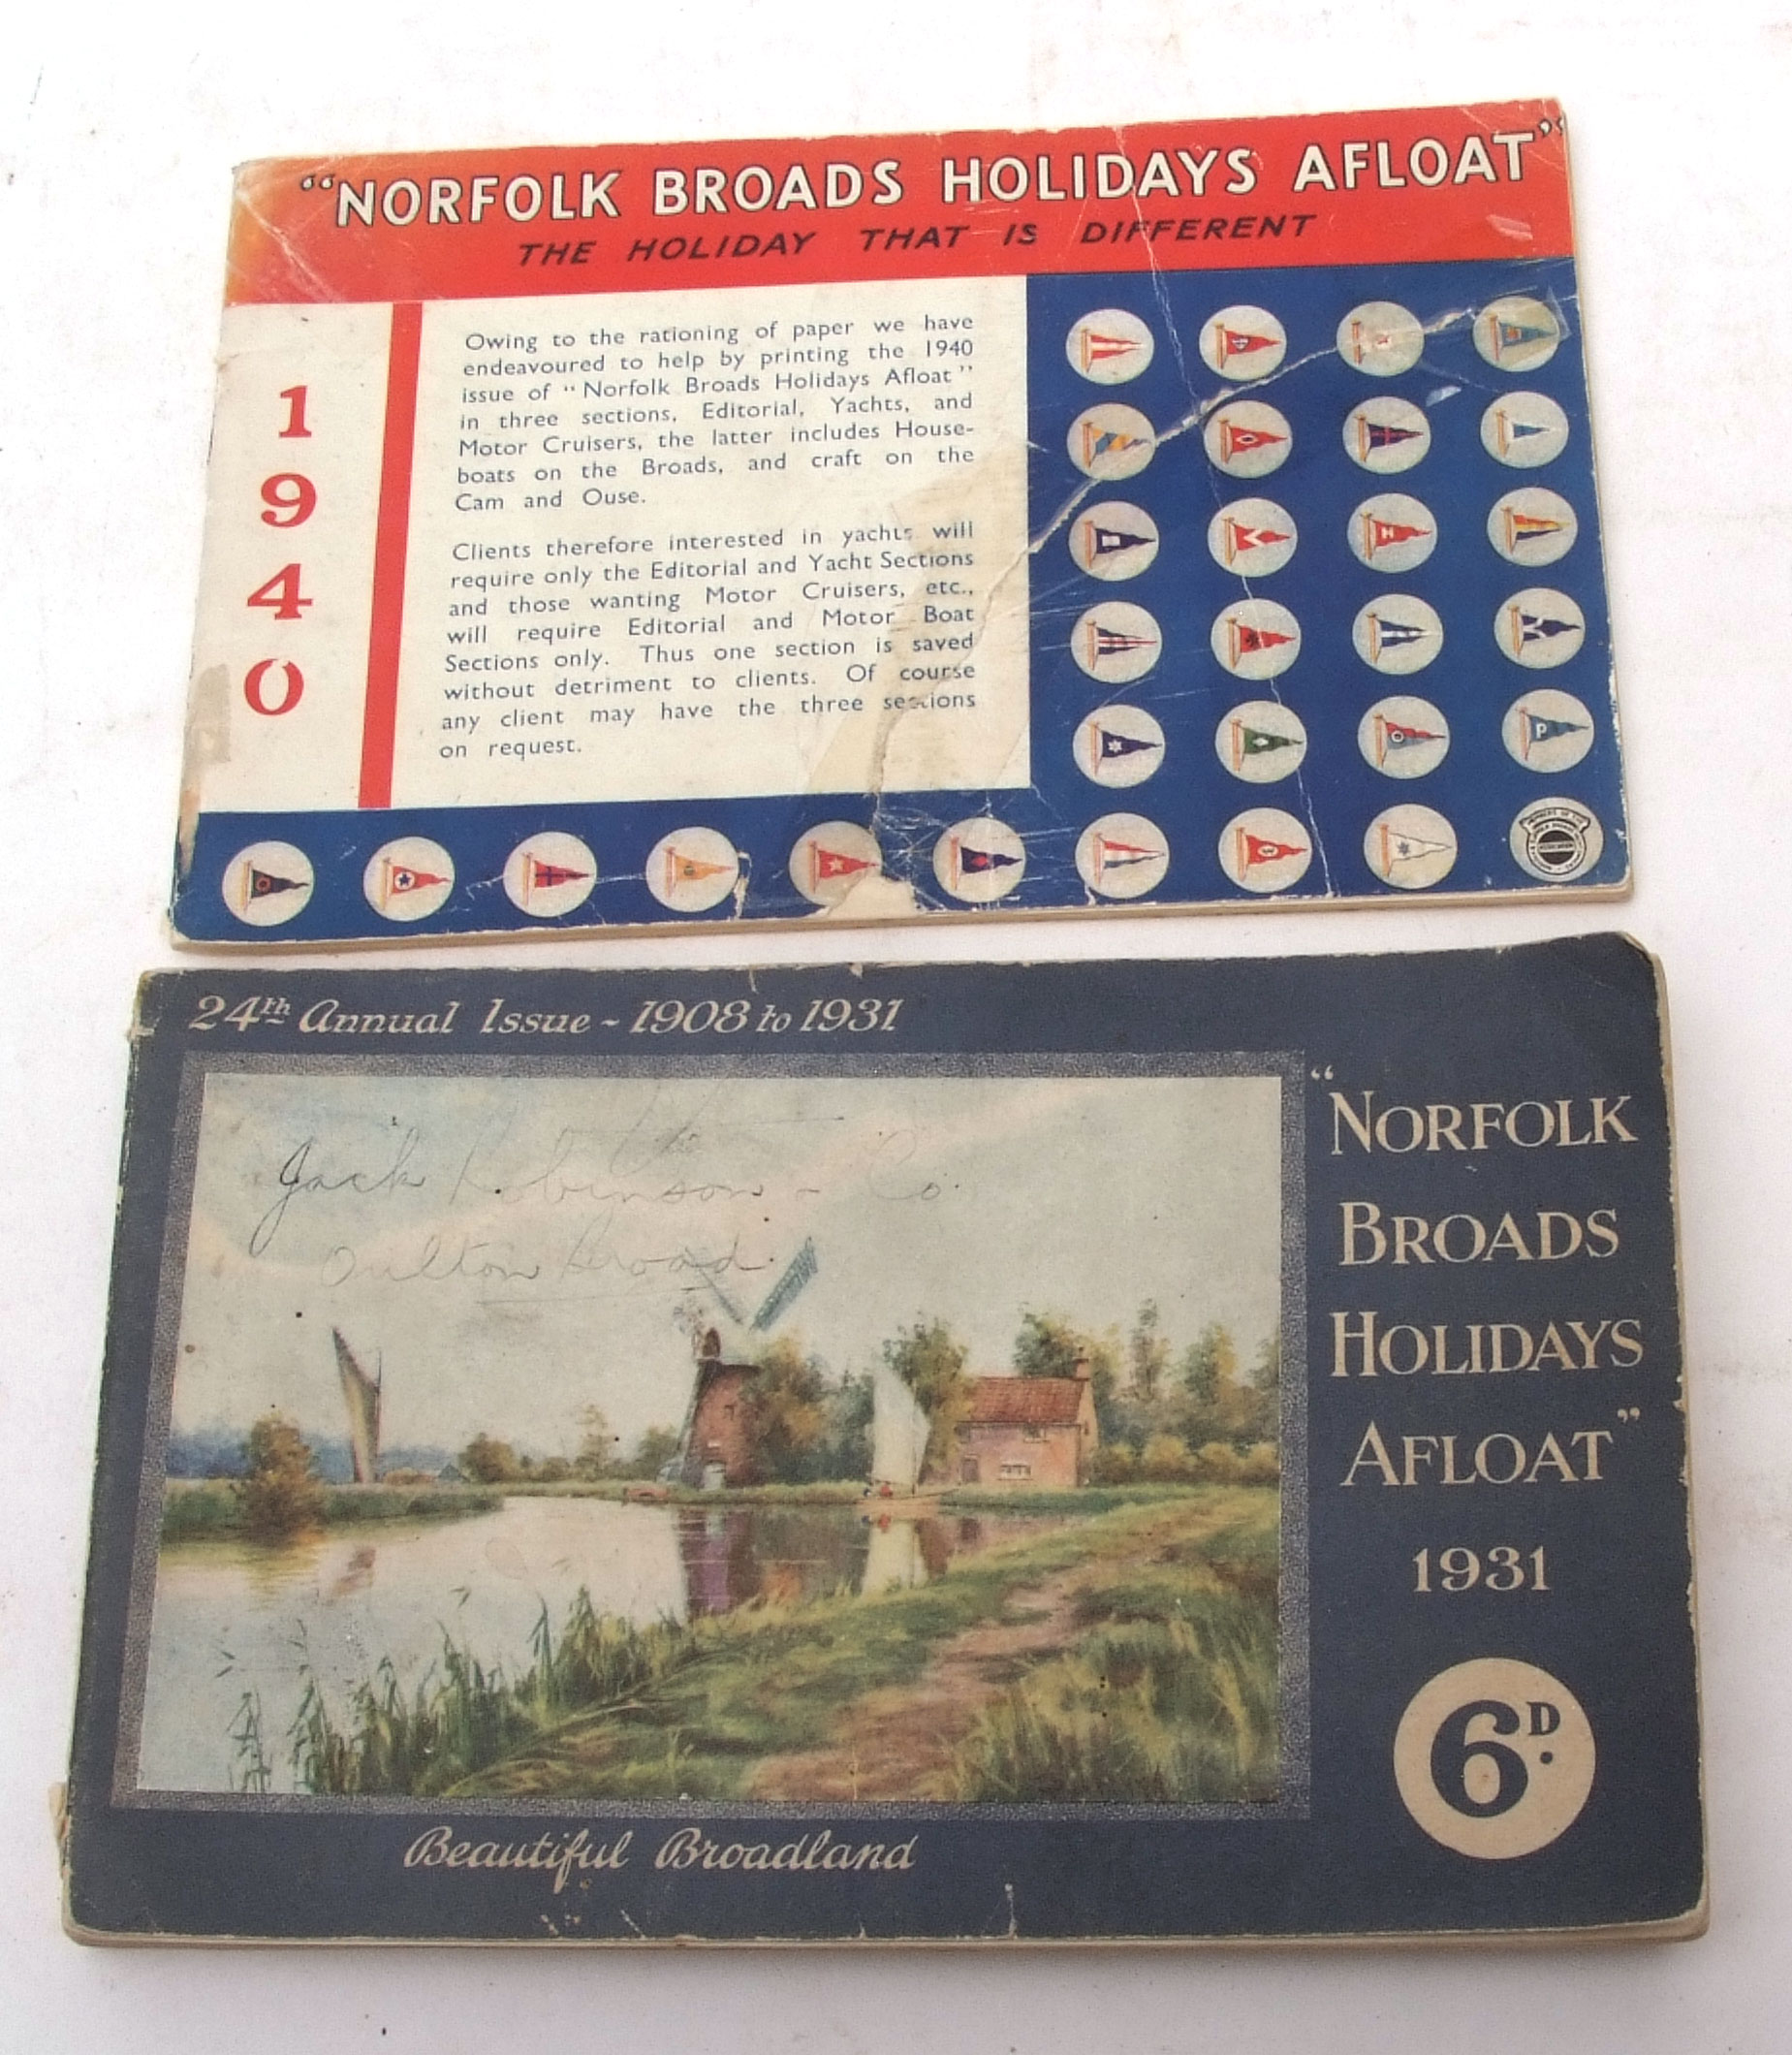 BLAKES LIMITED (PUBLISHED): NORFOLK BROADS HOLIDAYS AFLOAT 1931, 300pp catalogue, numerous black and